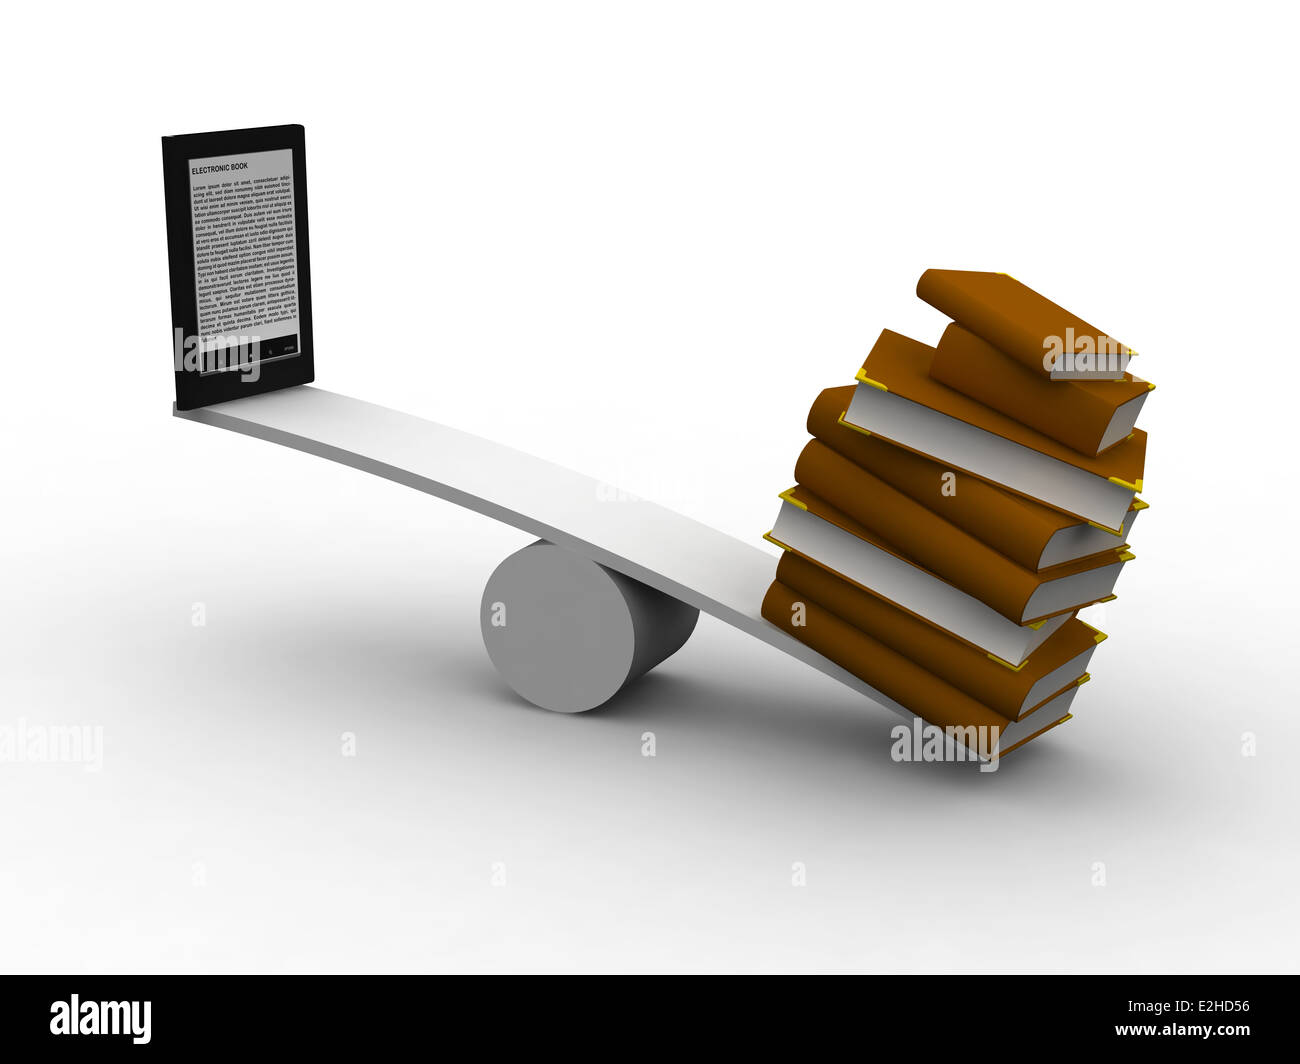 seesaw between many books and e-reader, 3d illustration Stock Photo